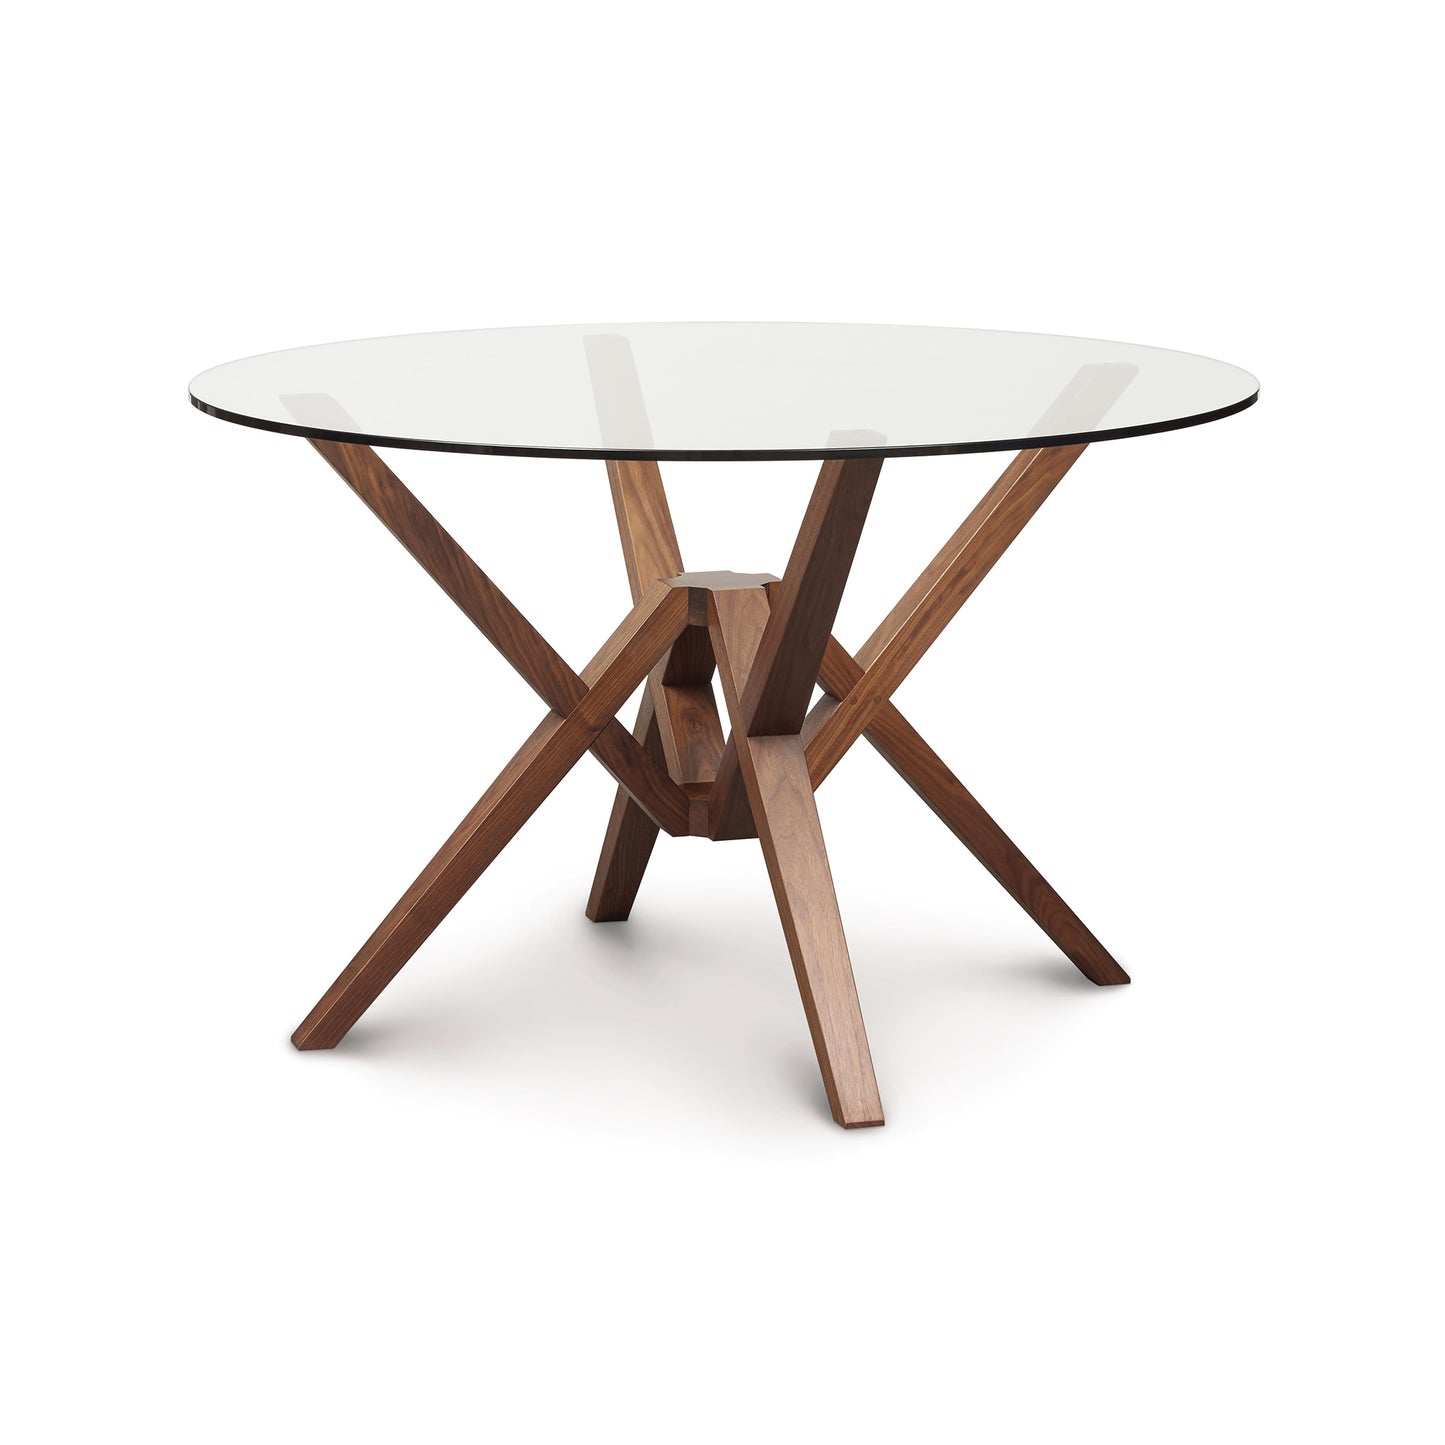 The Copeland Furniture Exeter Round Glass Top Table combines innovative engineering with a modern isometric design. It features a sleek glass top and sturdy wooden legs, making it the perfect addition to any contemporary dining space.